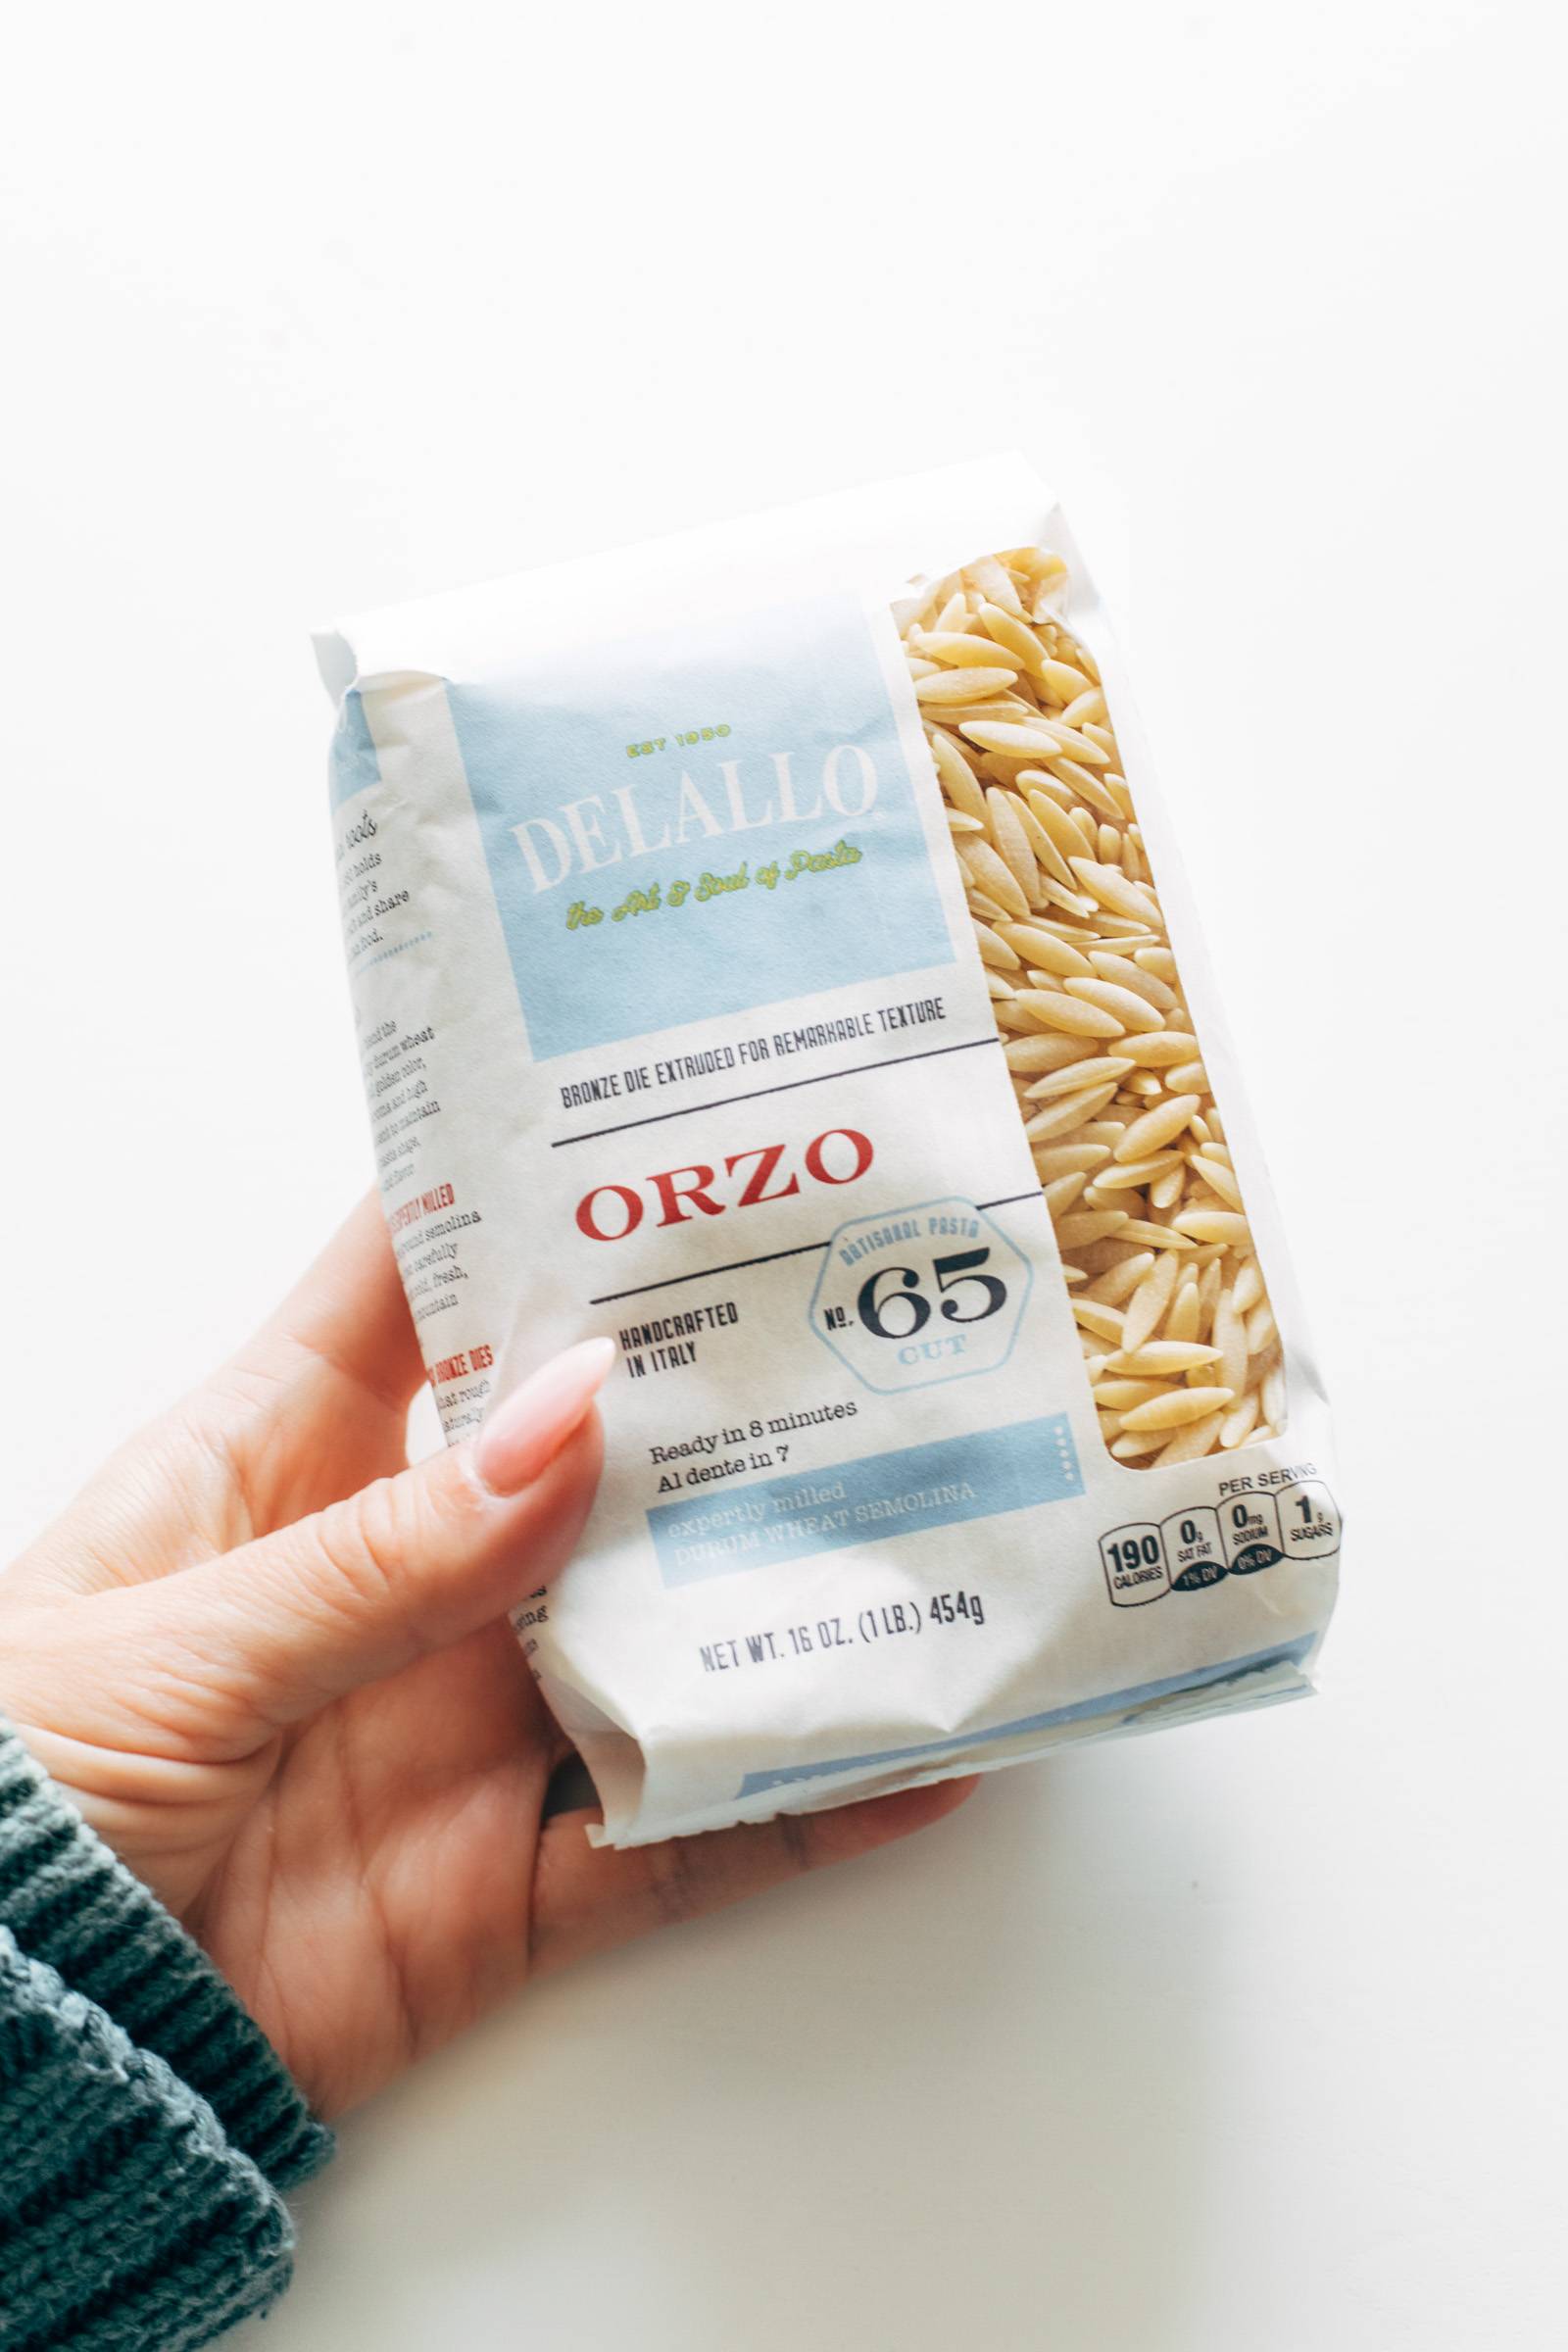 White hand holding a package of DeLallo orzo